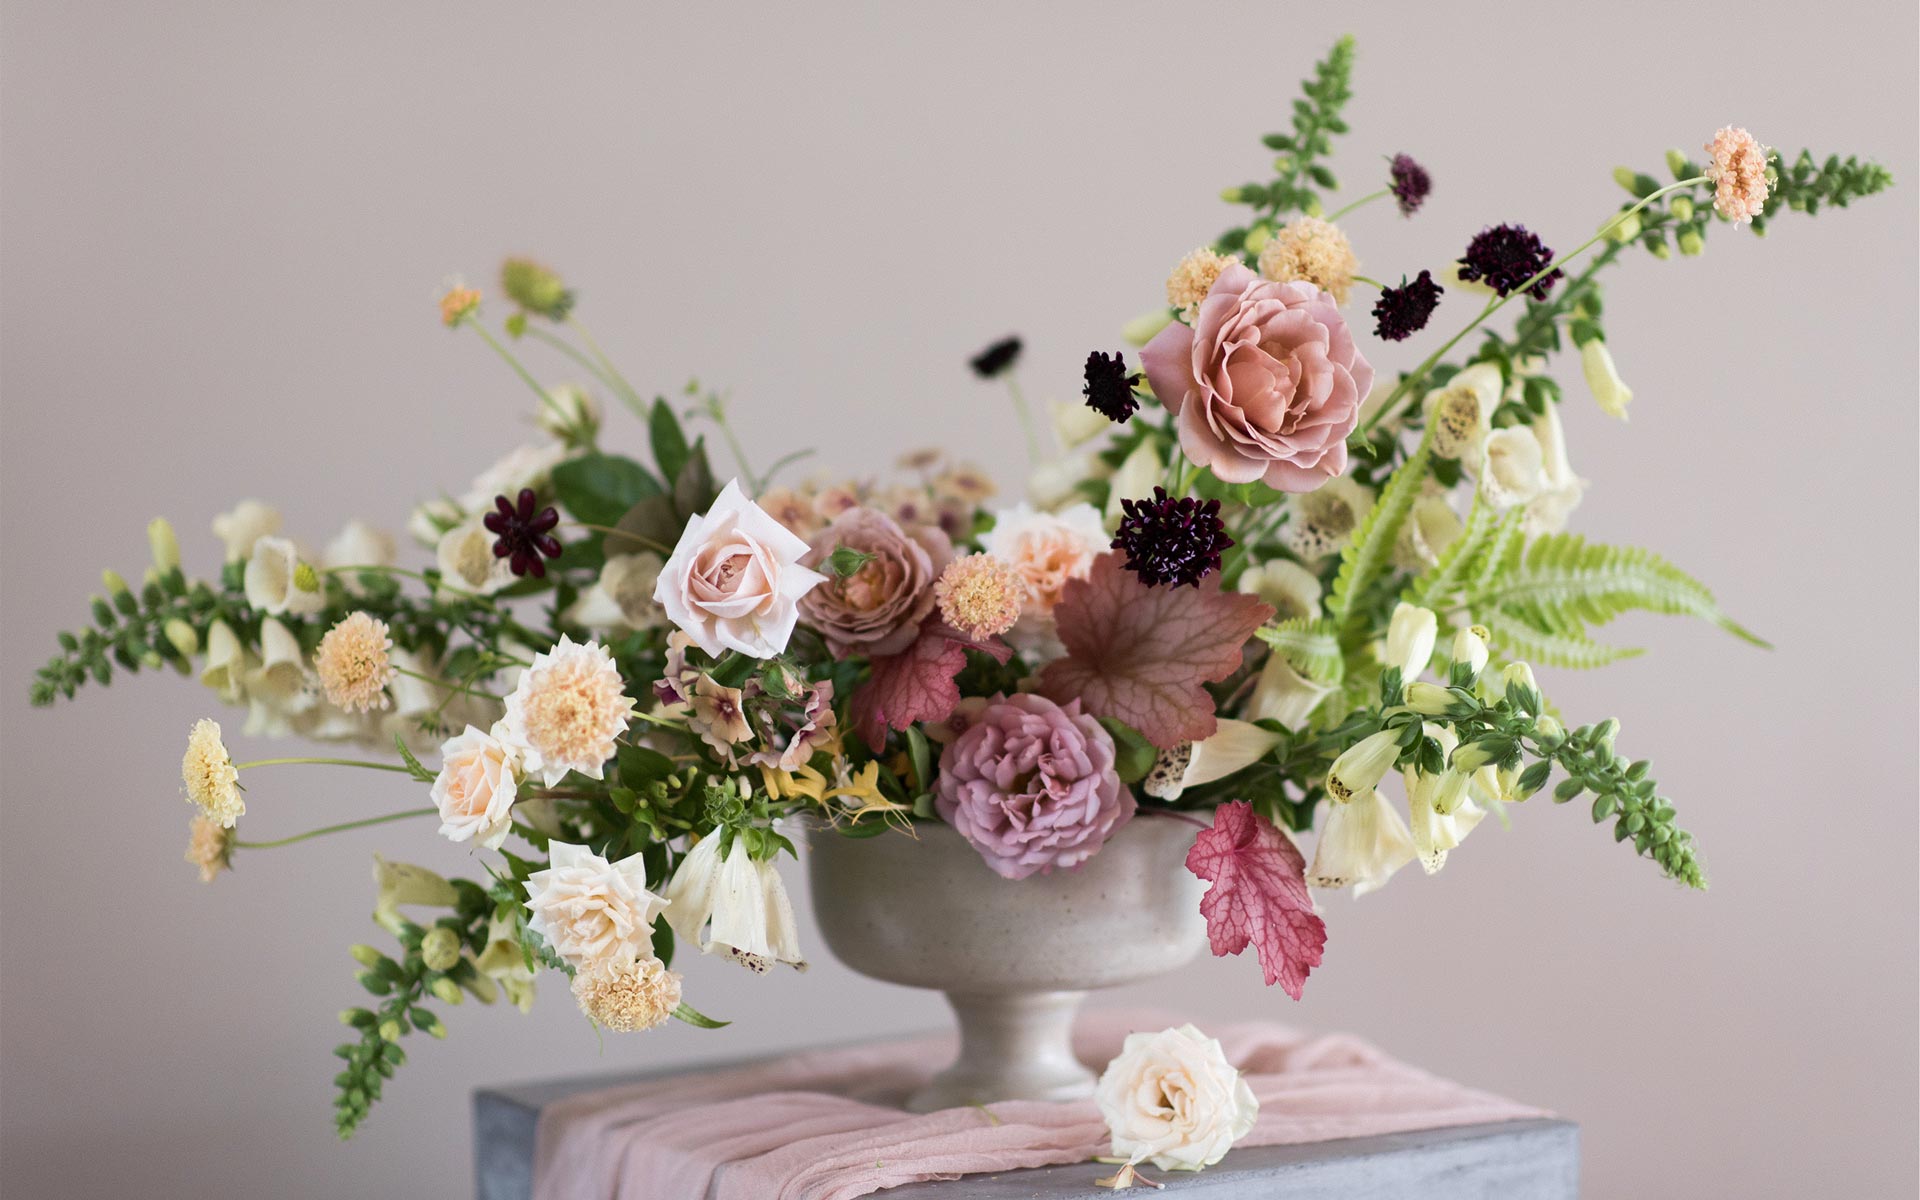 Santa Barbara Florist specializing in wedding flowers, floral design, ceremony and reception flowers